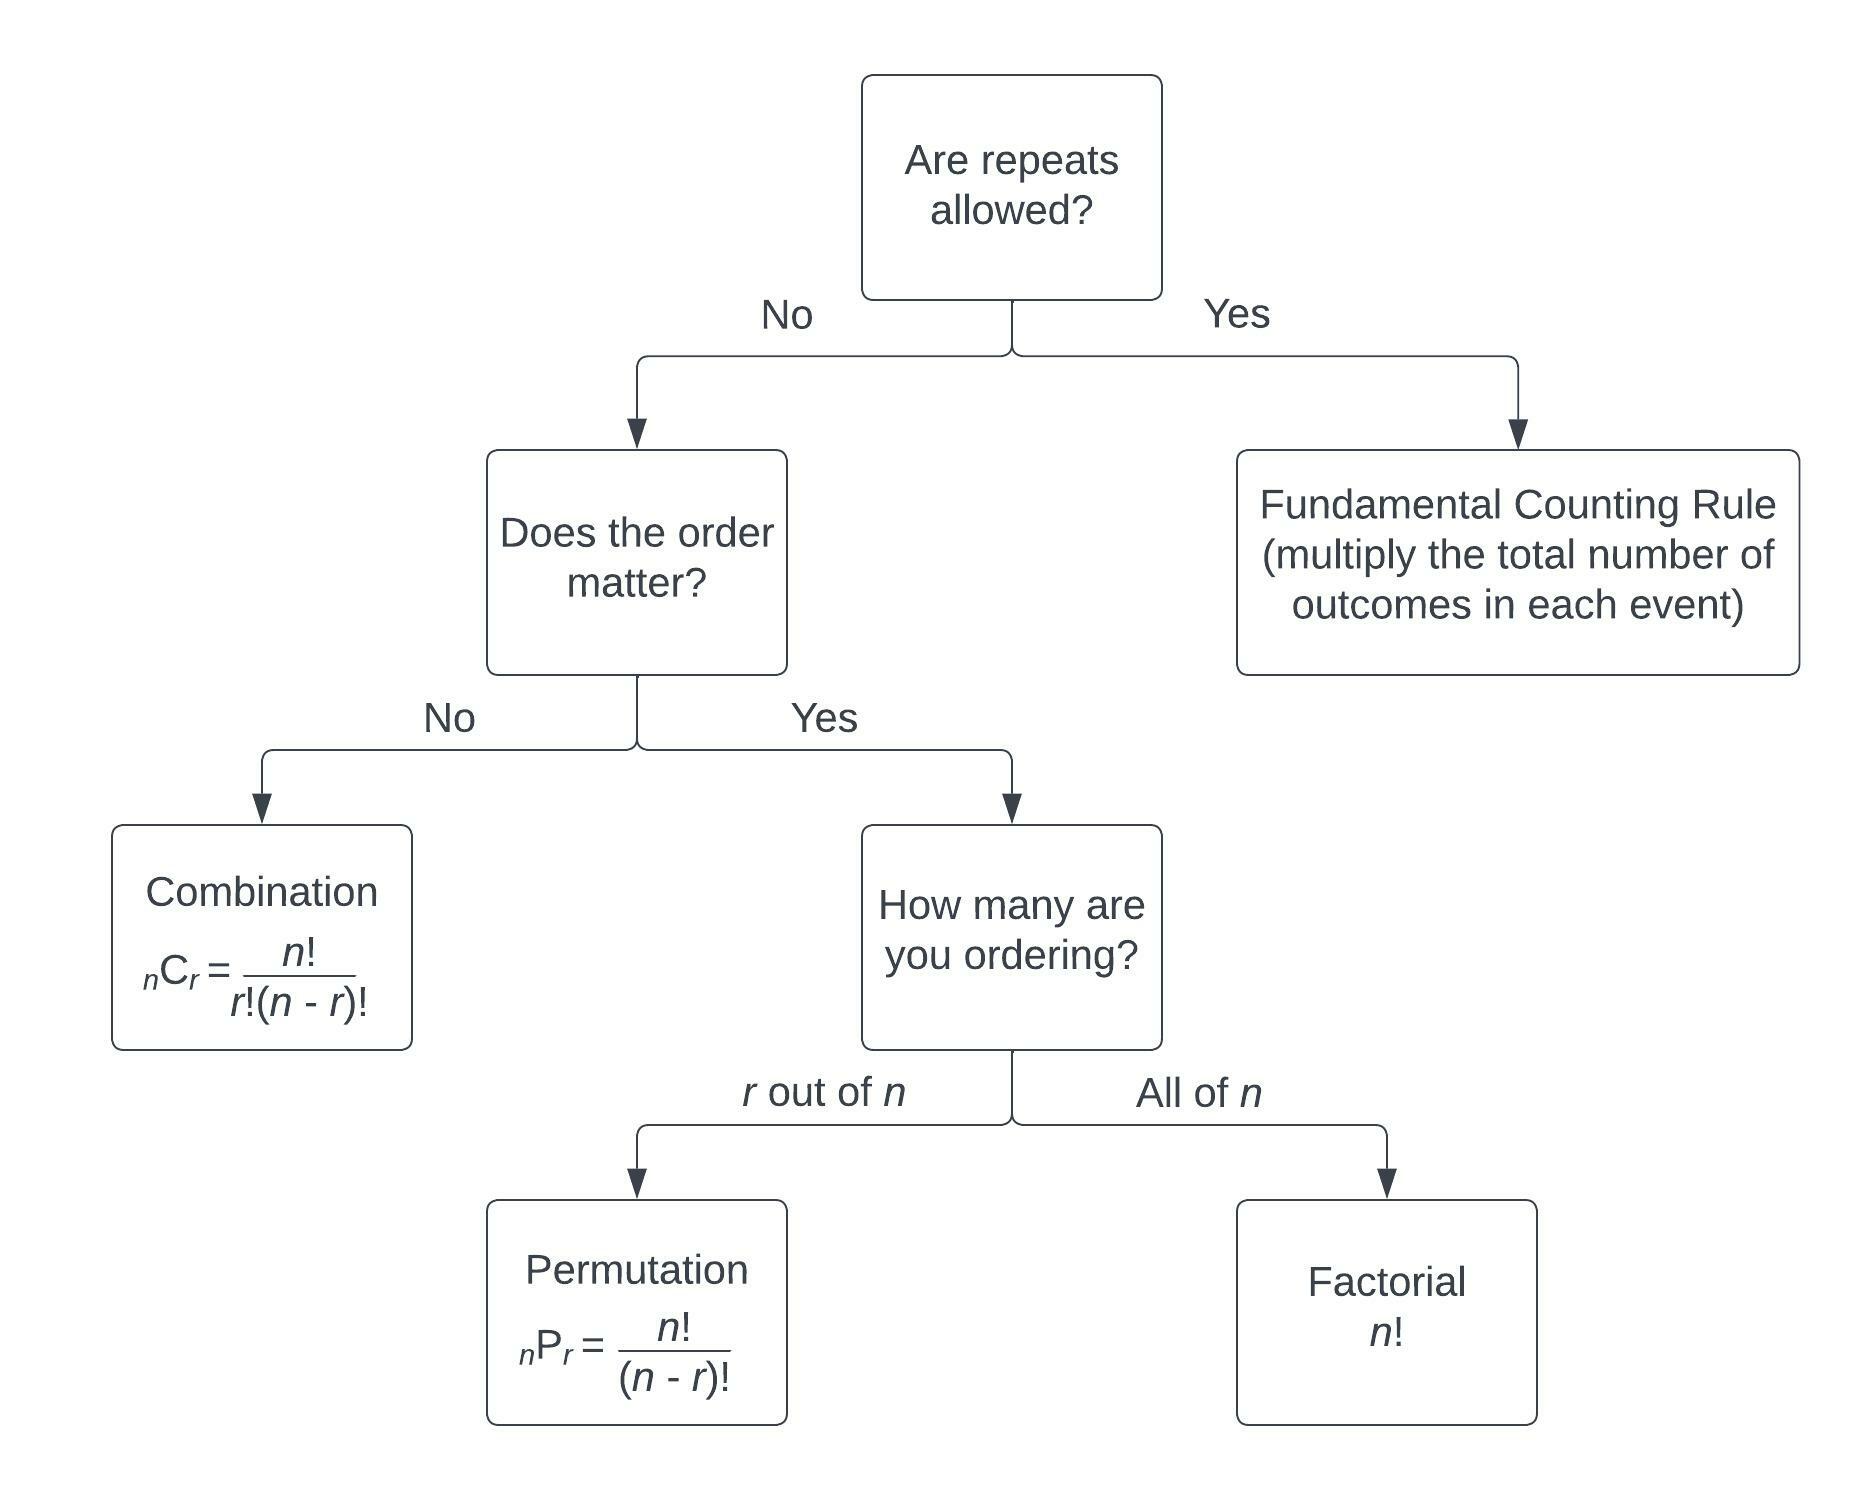 Flow chart.  Are repeats allowed?  Yes, then use the Fundamental Counting Rule (multiply the total number of outcomes in each event).  No, then does the order matter?  Yes, then how many are you ordering?  If r out of n, use a permutation.  If ordering all of n, use n!.  If the order does not matter, use a combination. 